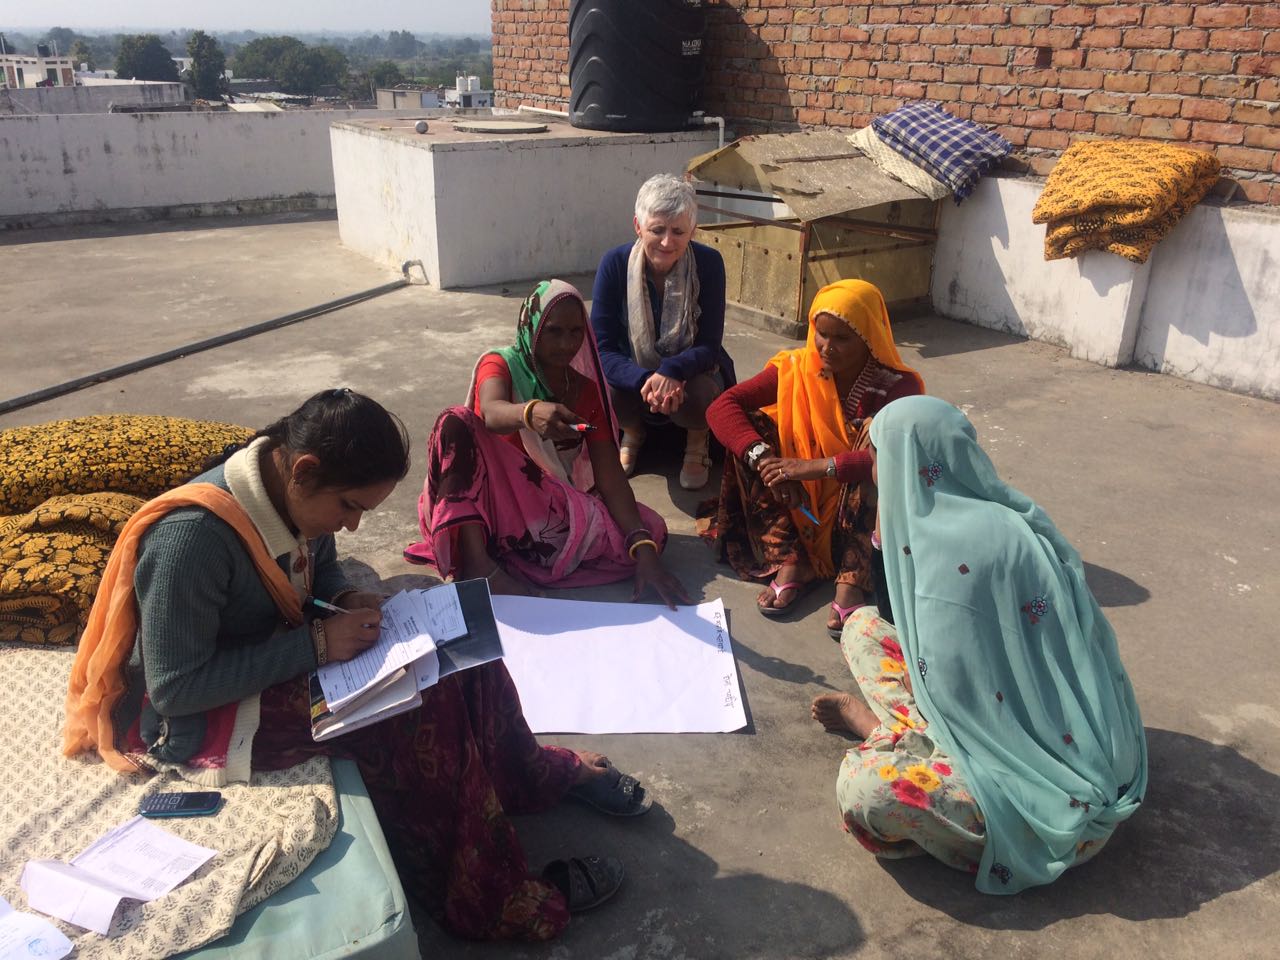 Enthusiasm and eagerness to learn with an aim to create jobs for women in rural India